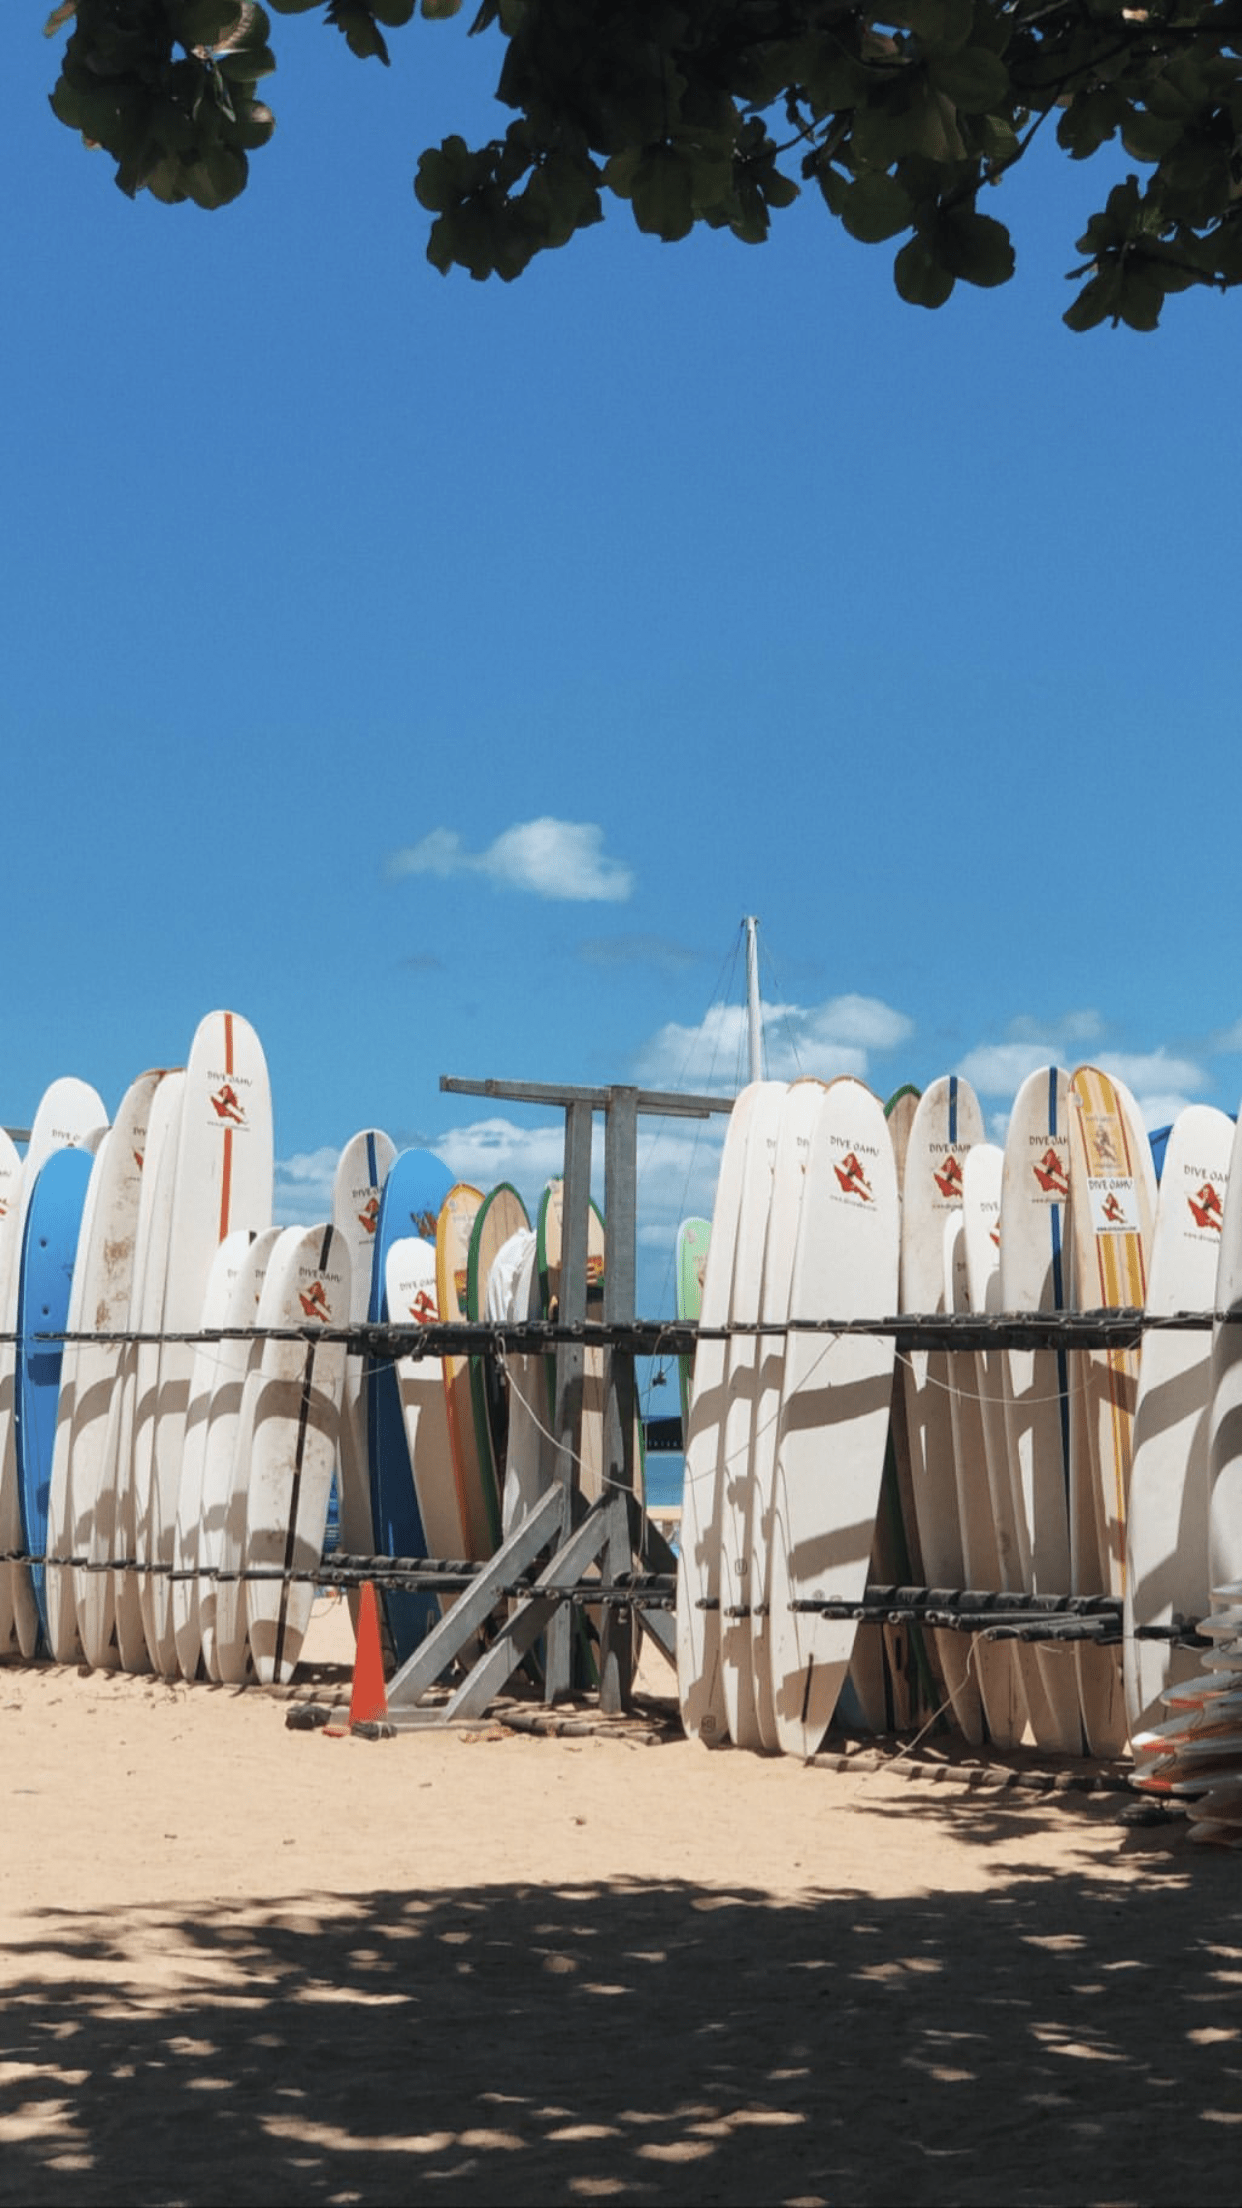 A group of surfboards on the beach - Surf